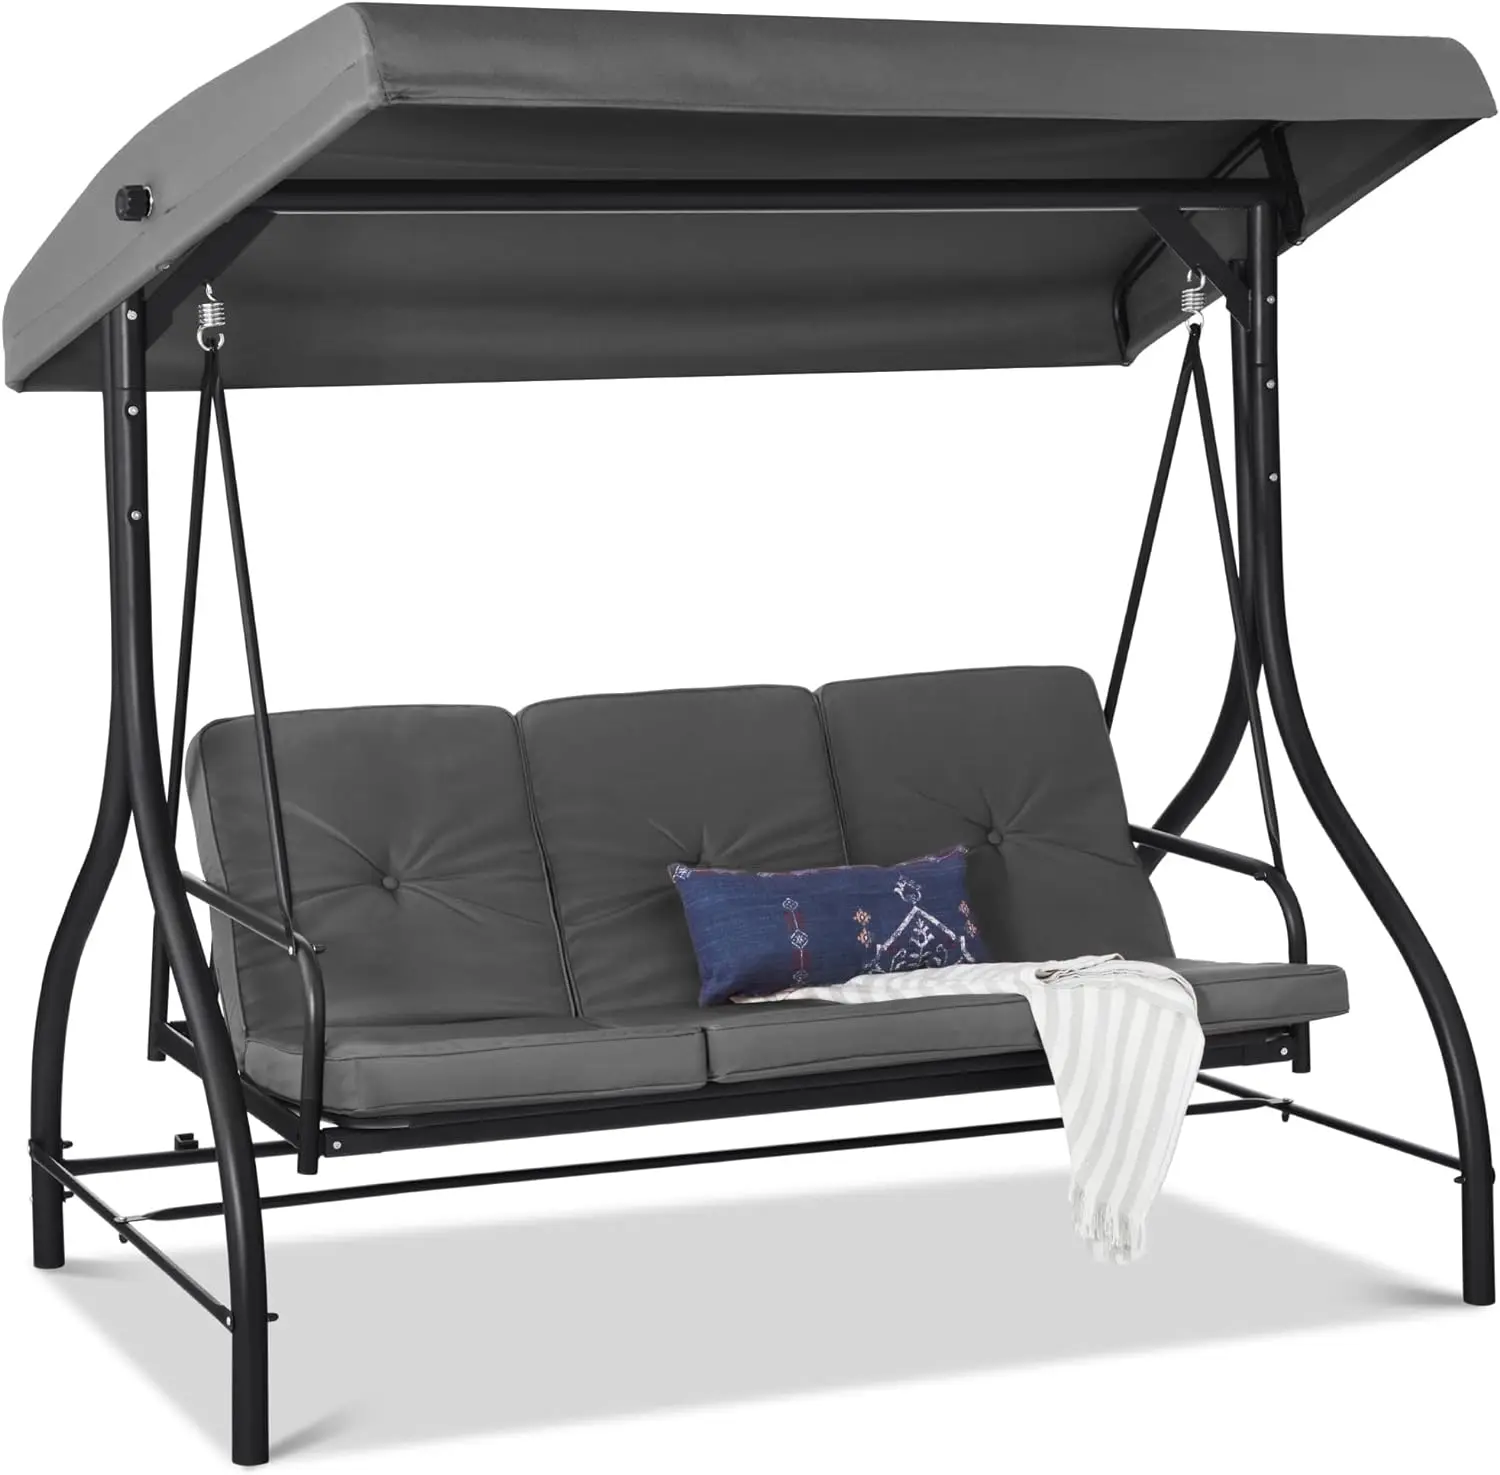 

3-Seat Outdoor Large Converting Canopy Swing Glider, Patio Hammock Lounge Chair for Porch, Backyard w/Flatbed, Adjustable Shade